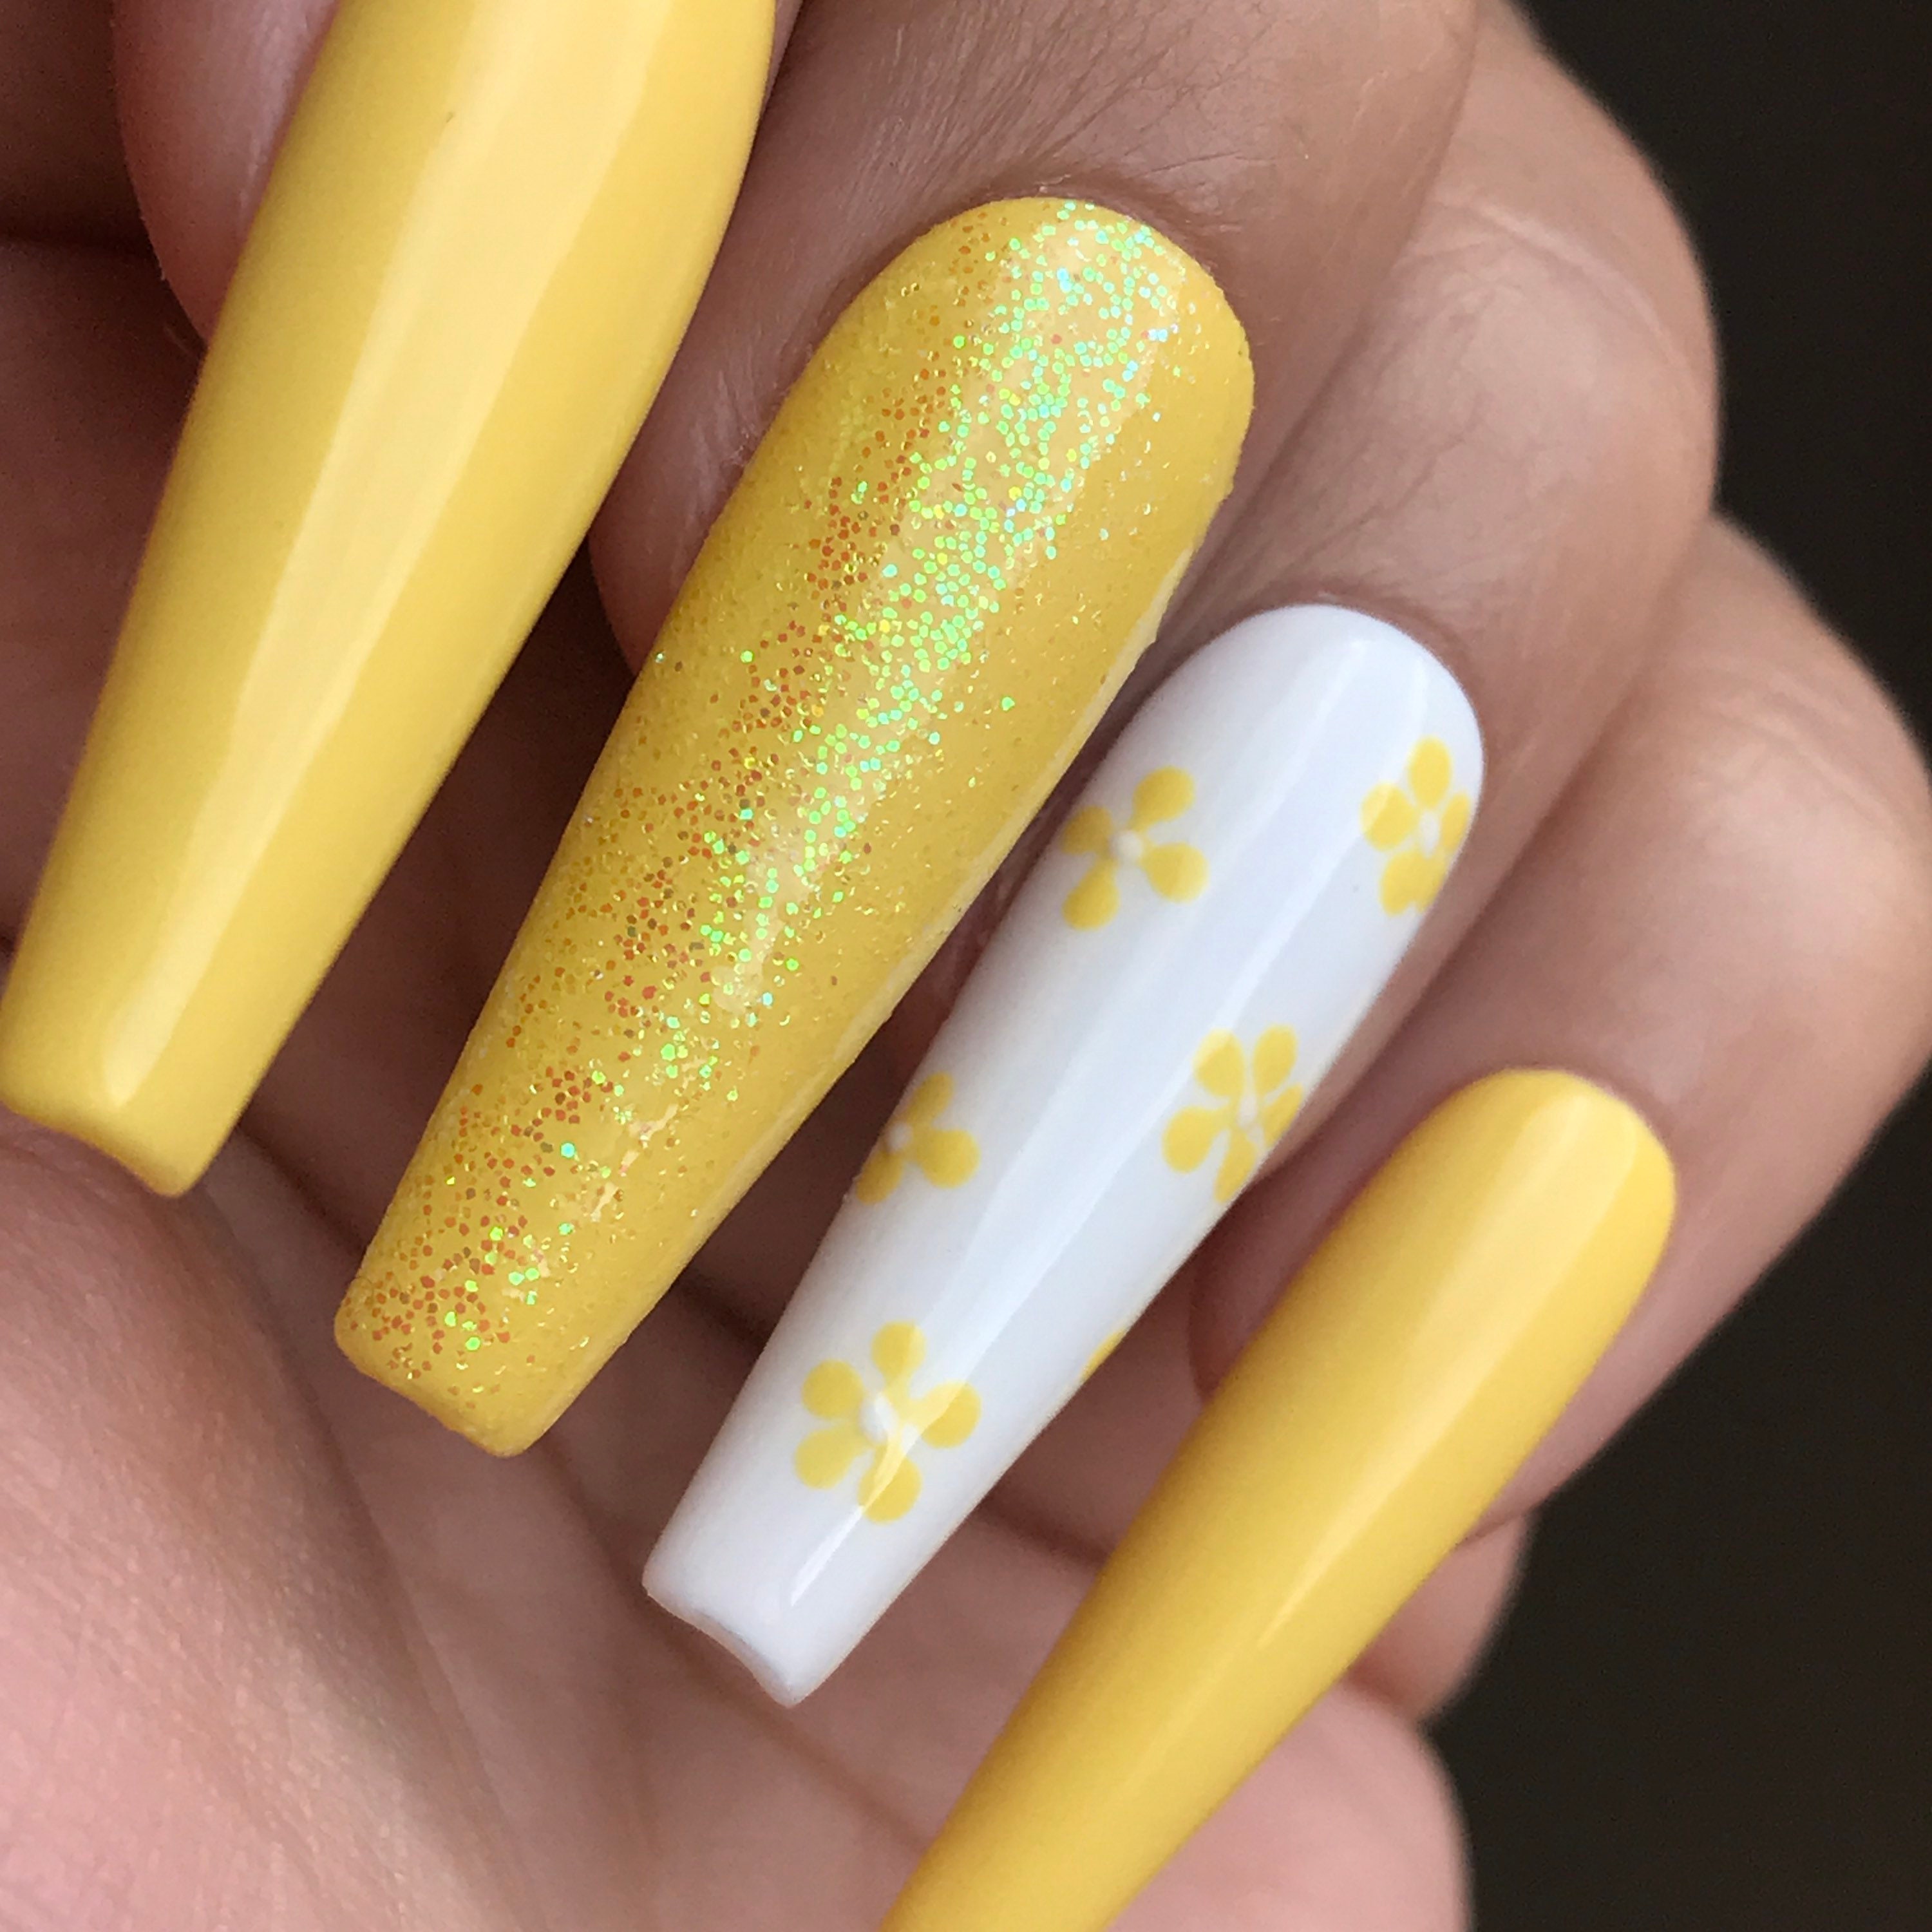 Summer yellow coffin nails - YouTube